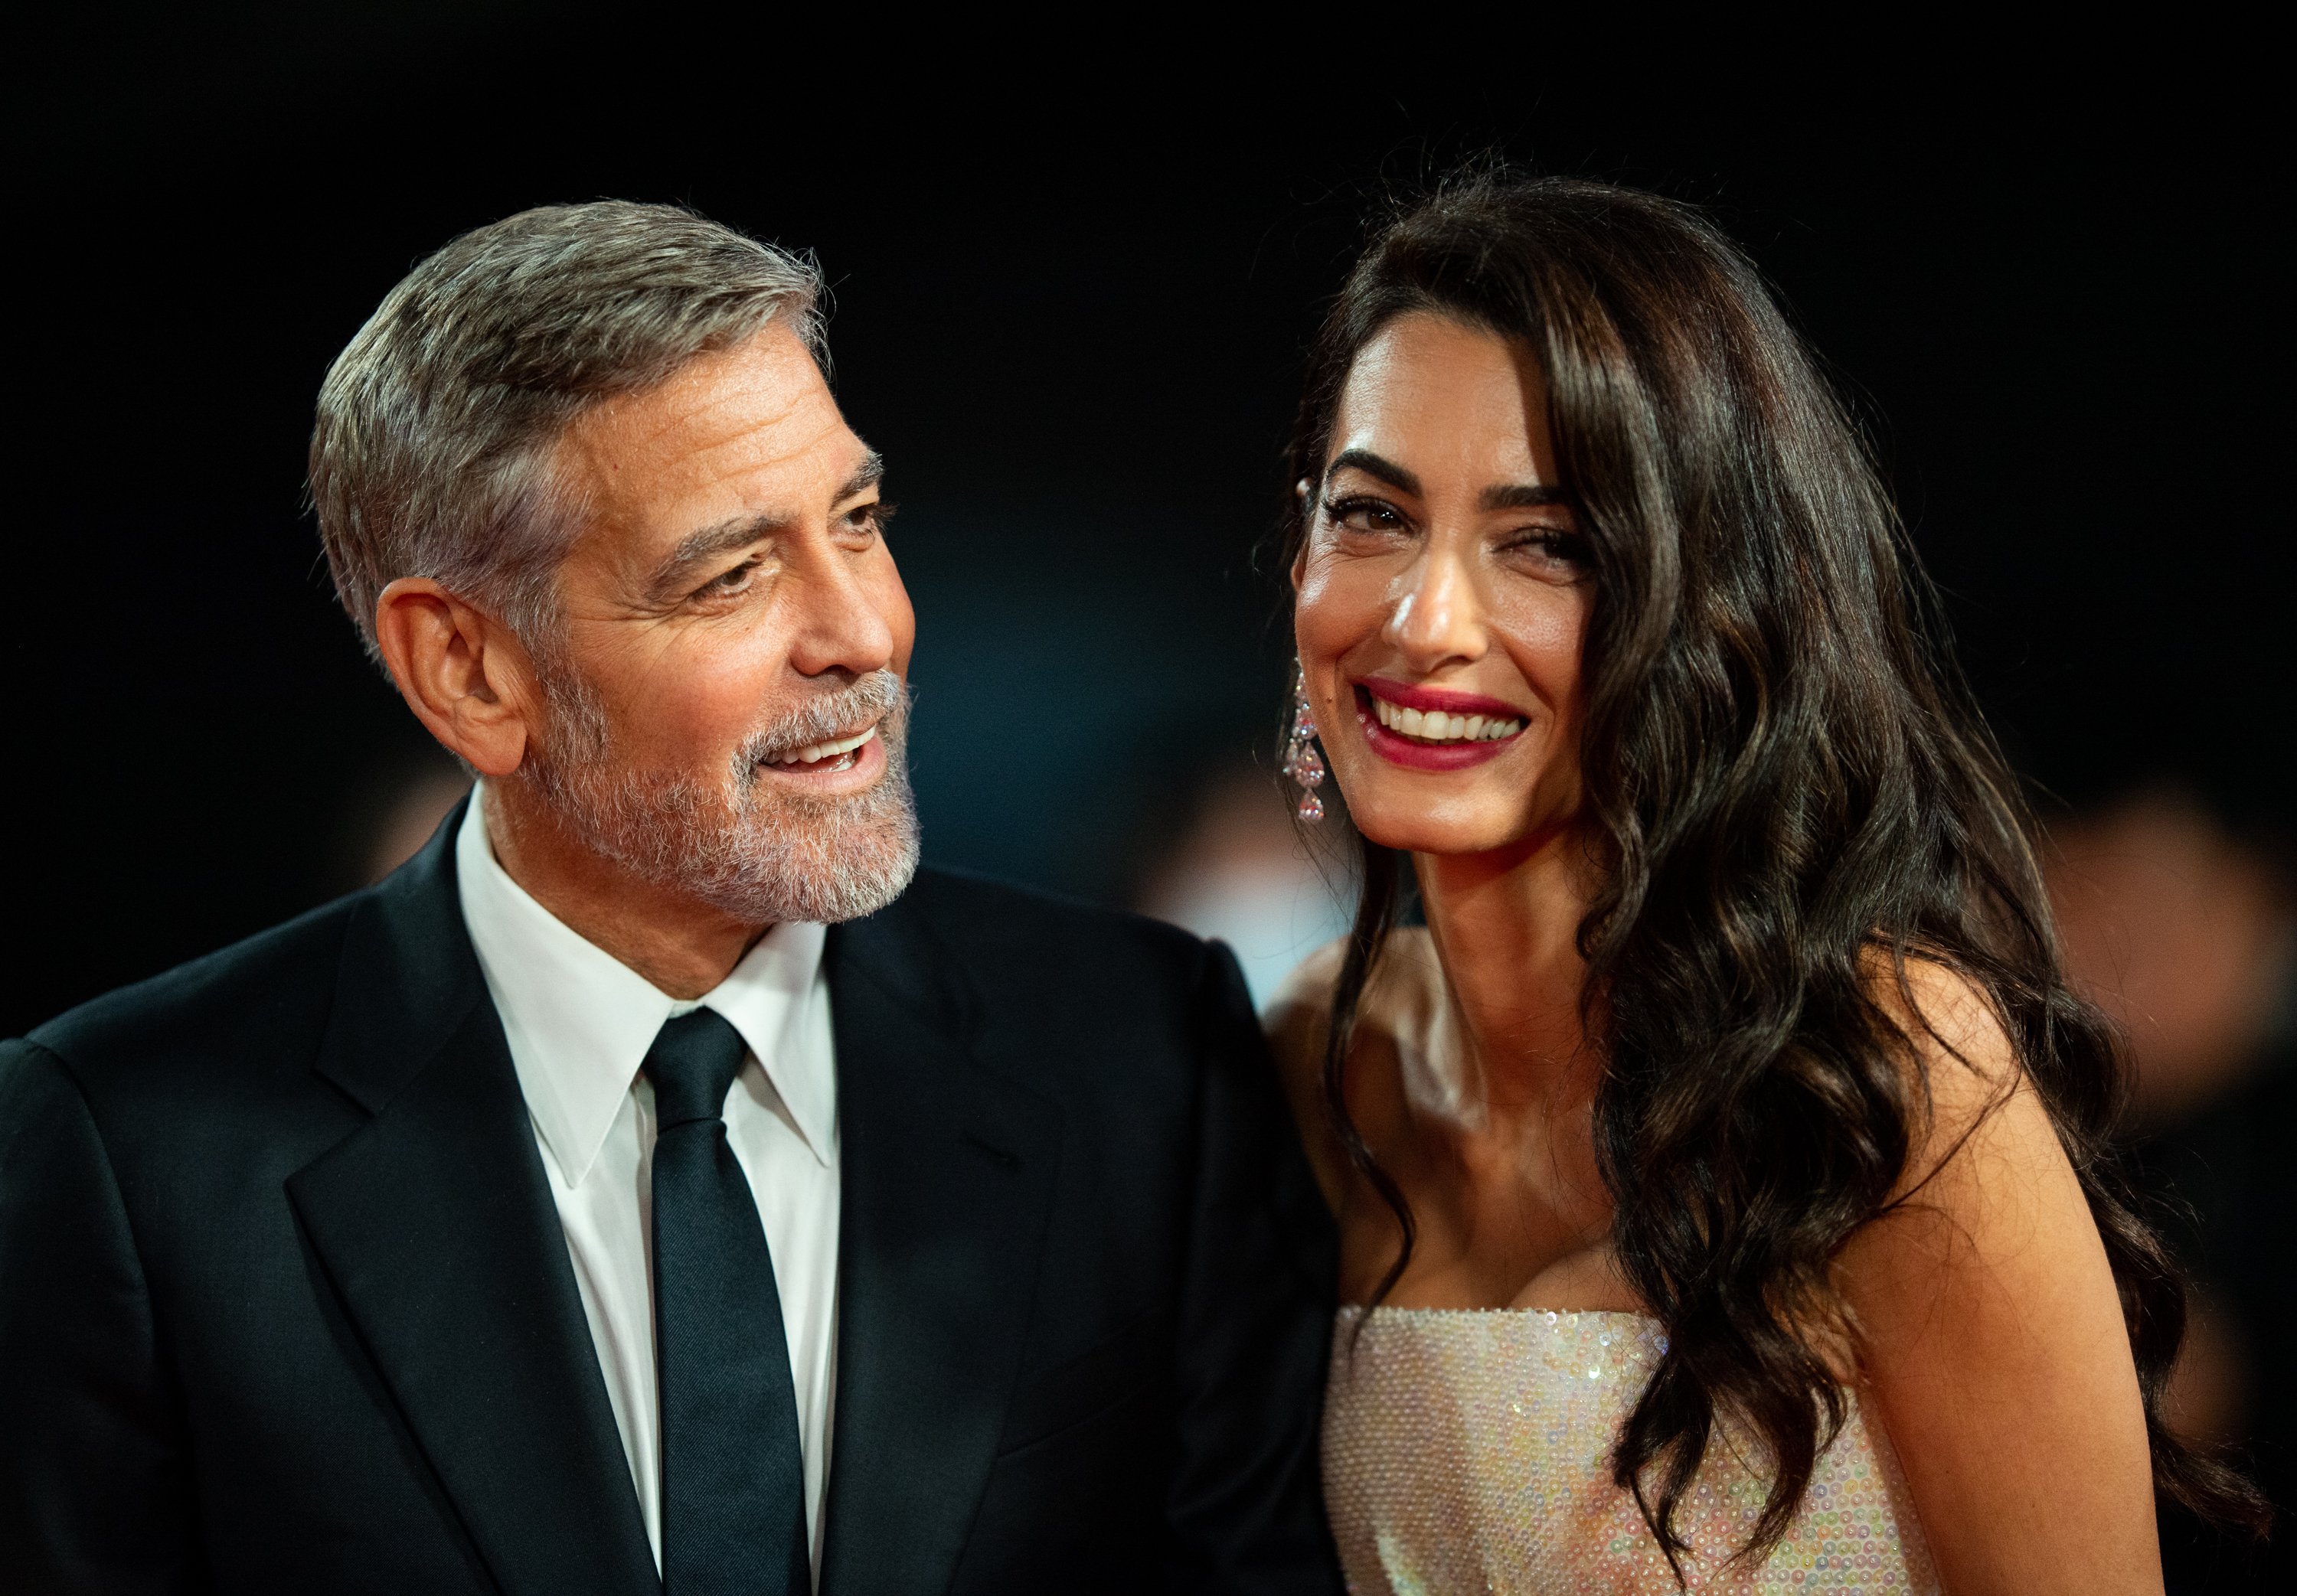 George Clooney and Amal Clooney attending "The Tender Bar" premiere during the 65th BFI London Film Festival at The Royal Festival Hall on October 10, 2021 in London, England. / Source: Getty Images